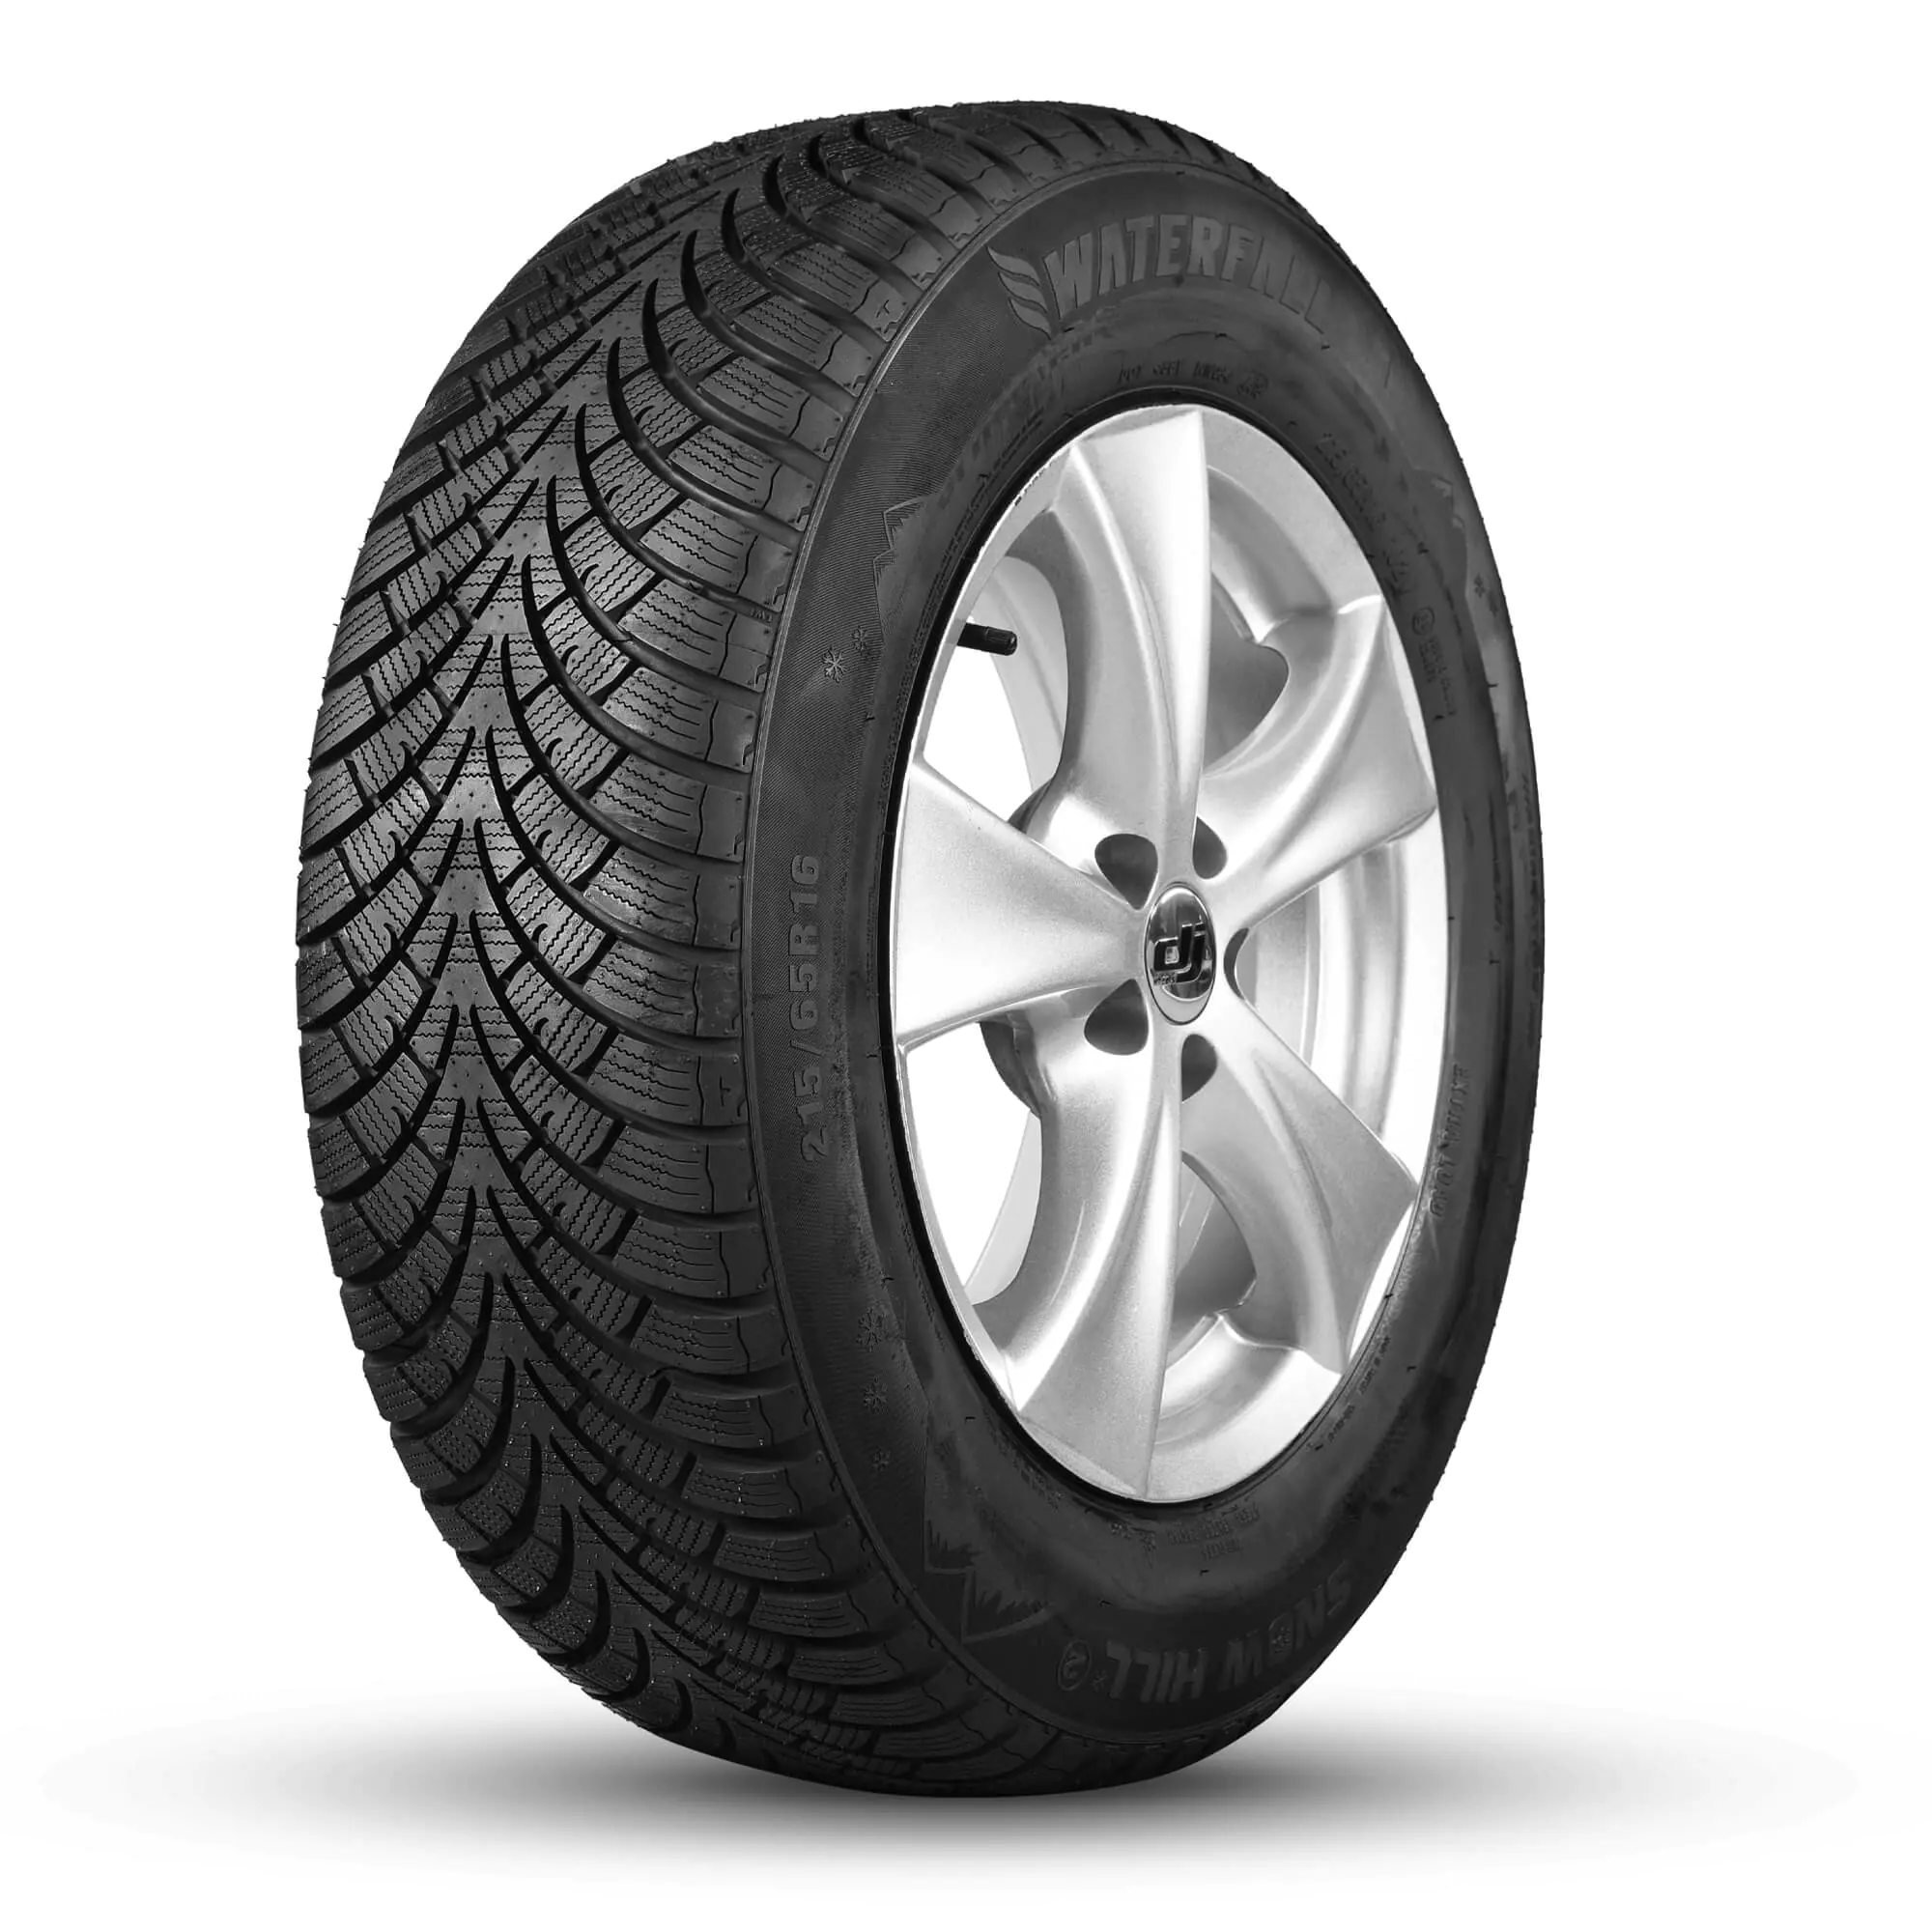 Gomme Autovettura Waterfall 185/60 R15 88V SNOW HILL 3 M+S Invernale